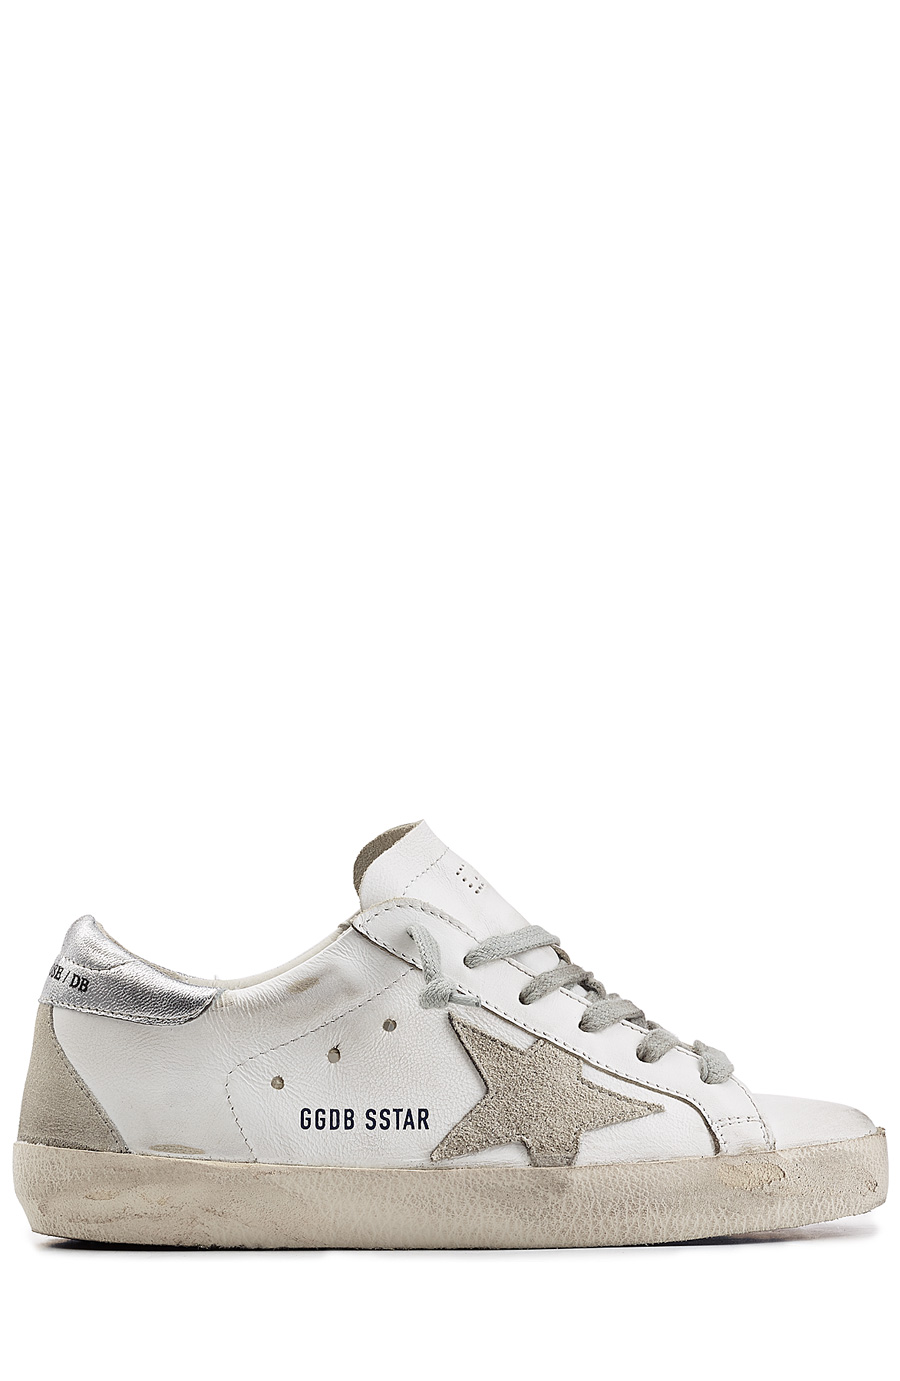 Golden Goose Super Star Suede And Leather Sneakers | ModeSens